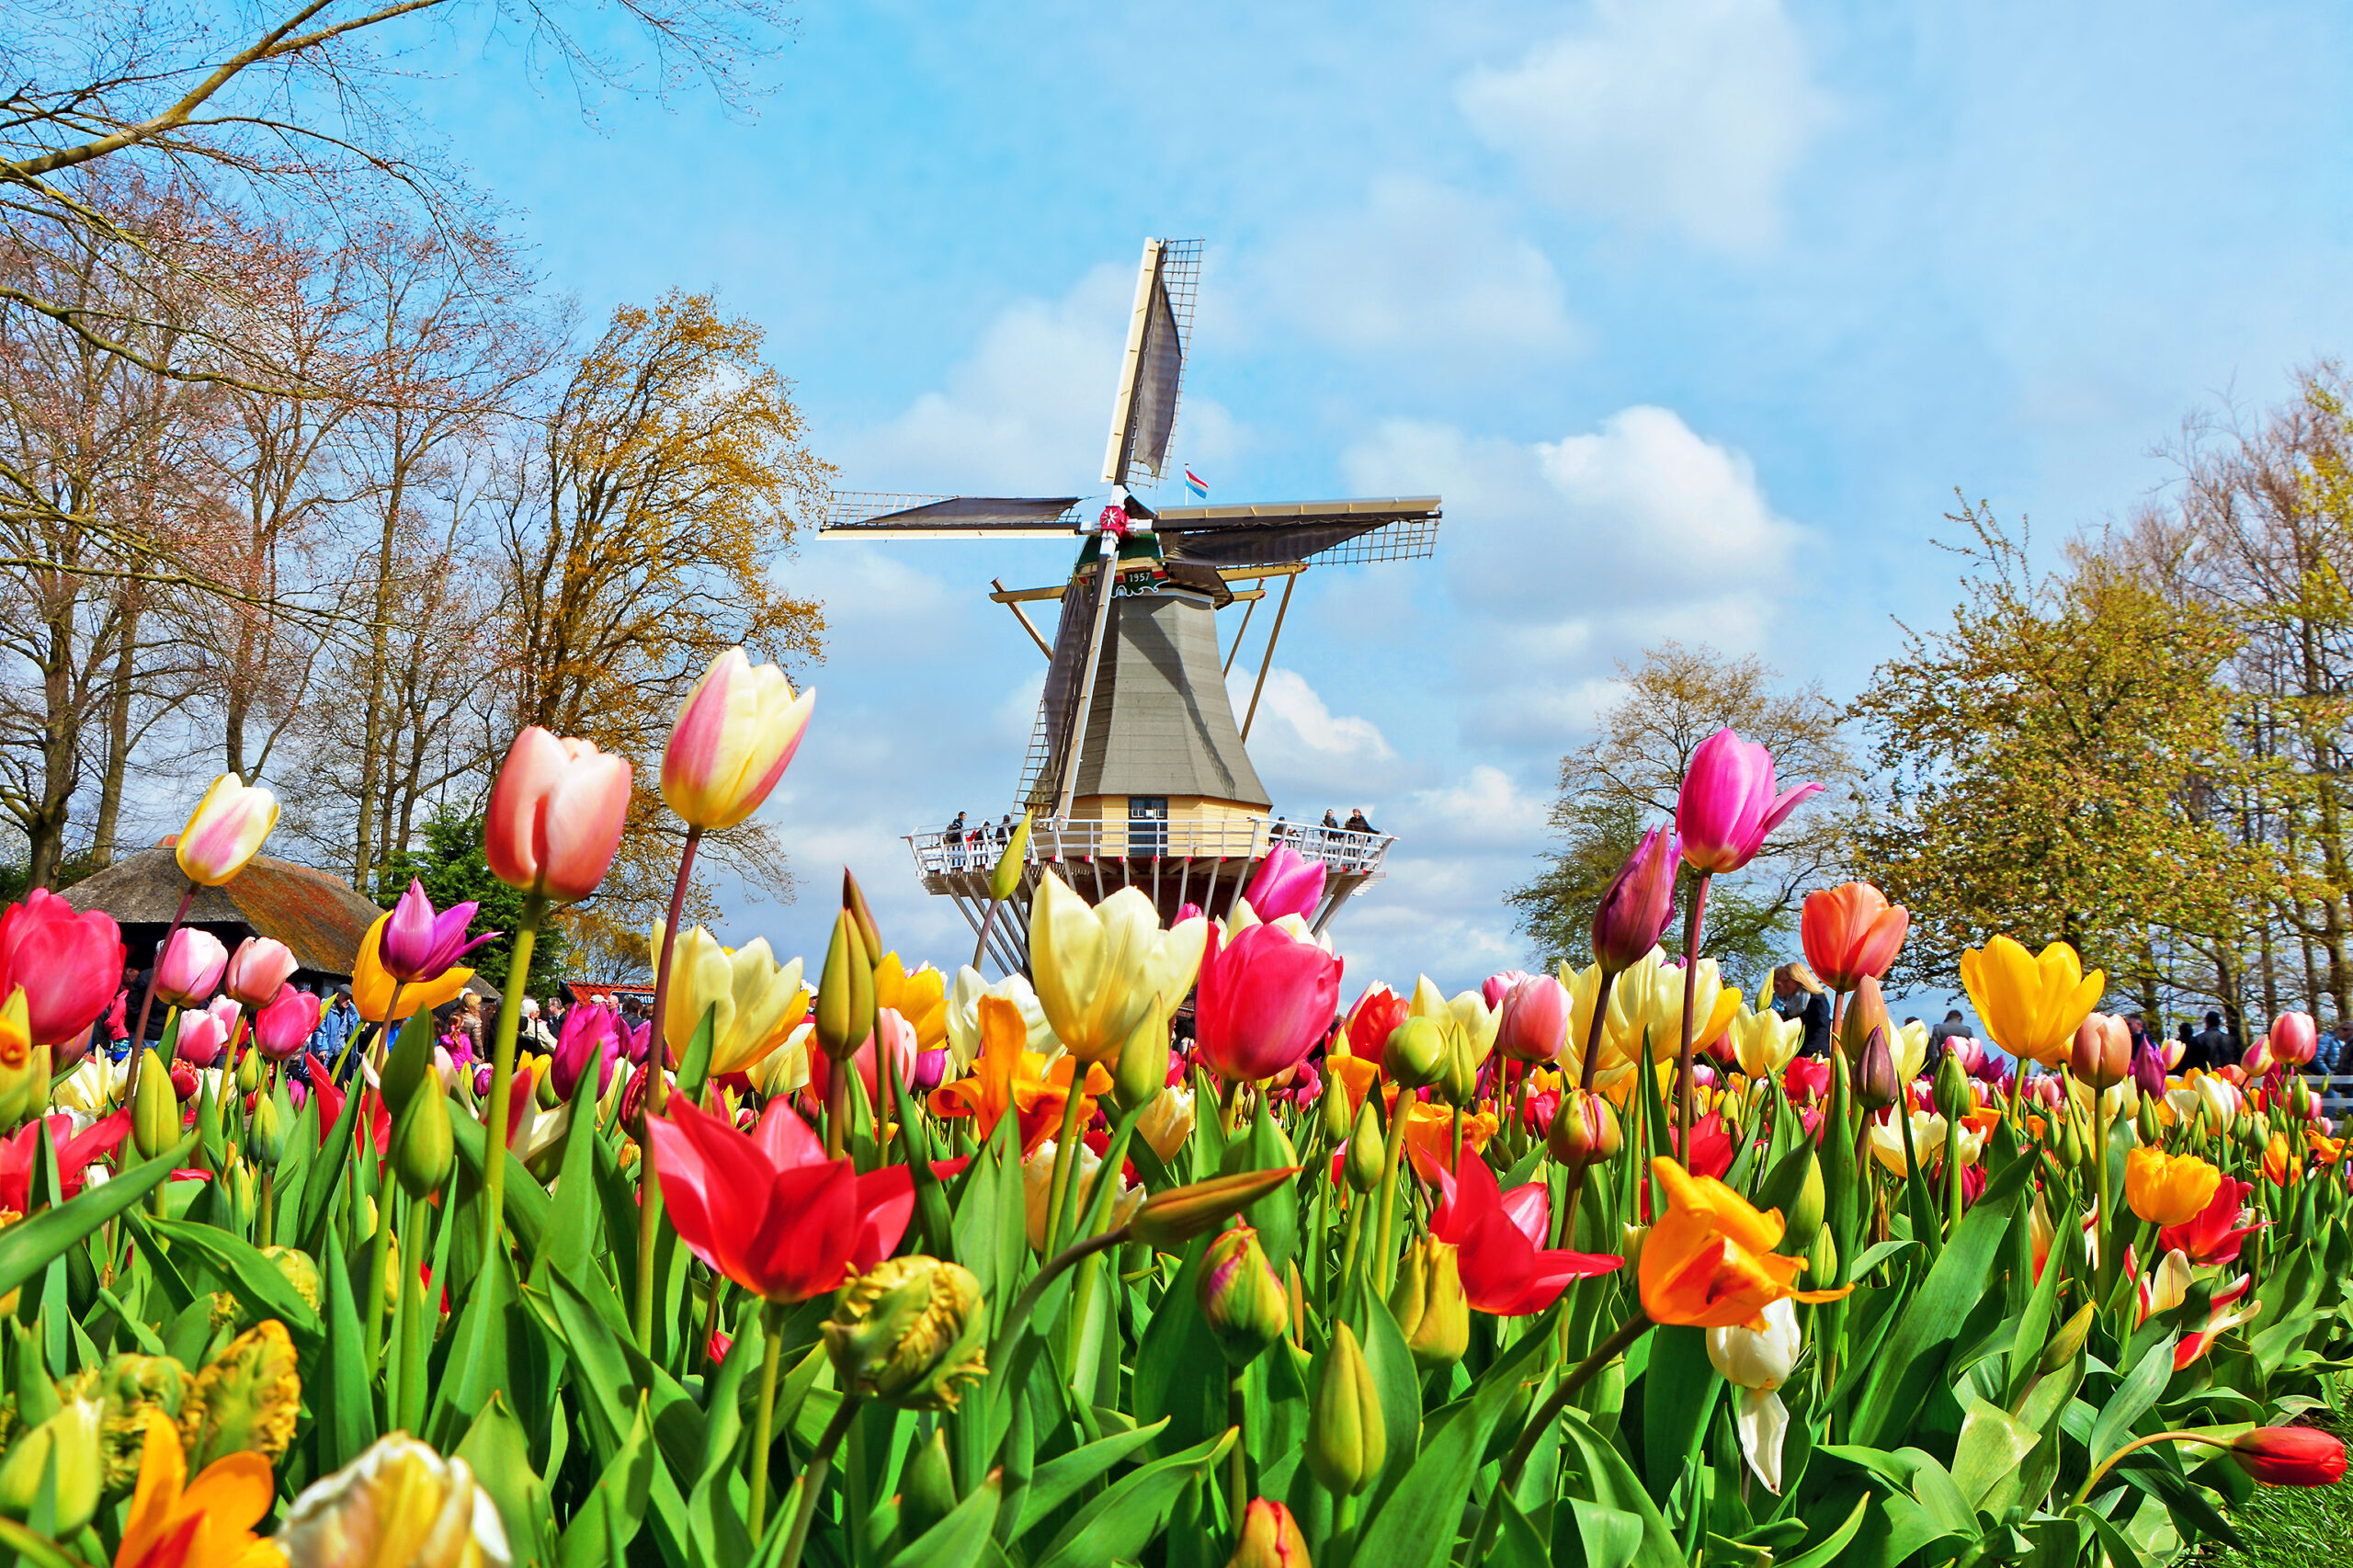 9 Things to Know When Visiting the Tulip Fields in the Netherlands